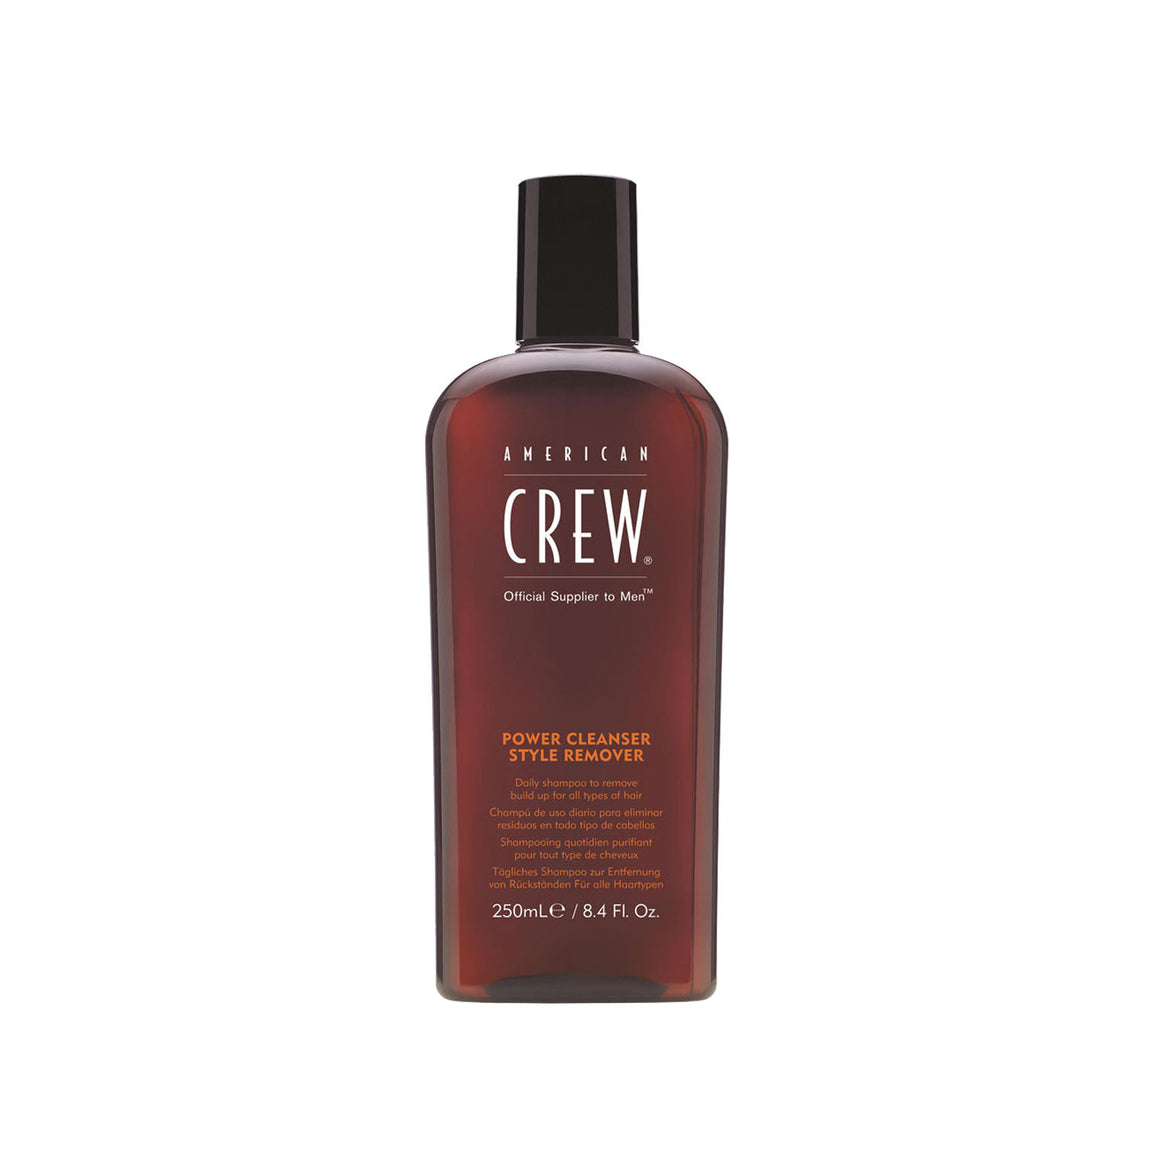 American Crew - Shampooing quotidien purifiant - (Power cleanser style remover)